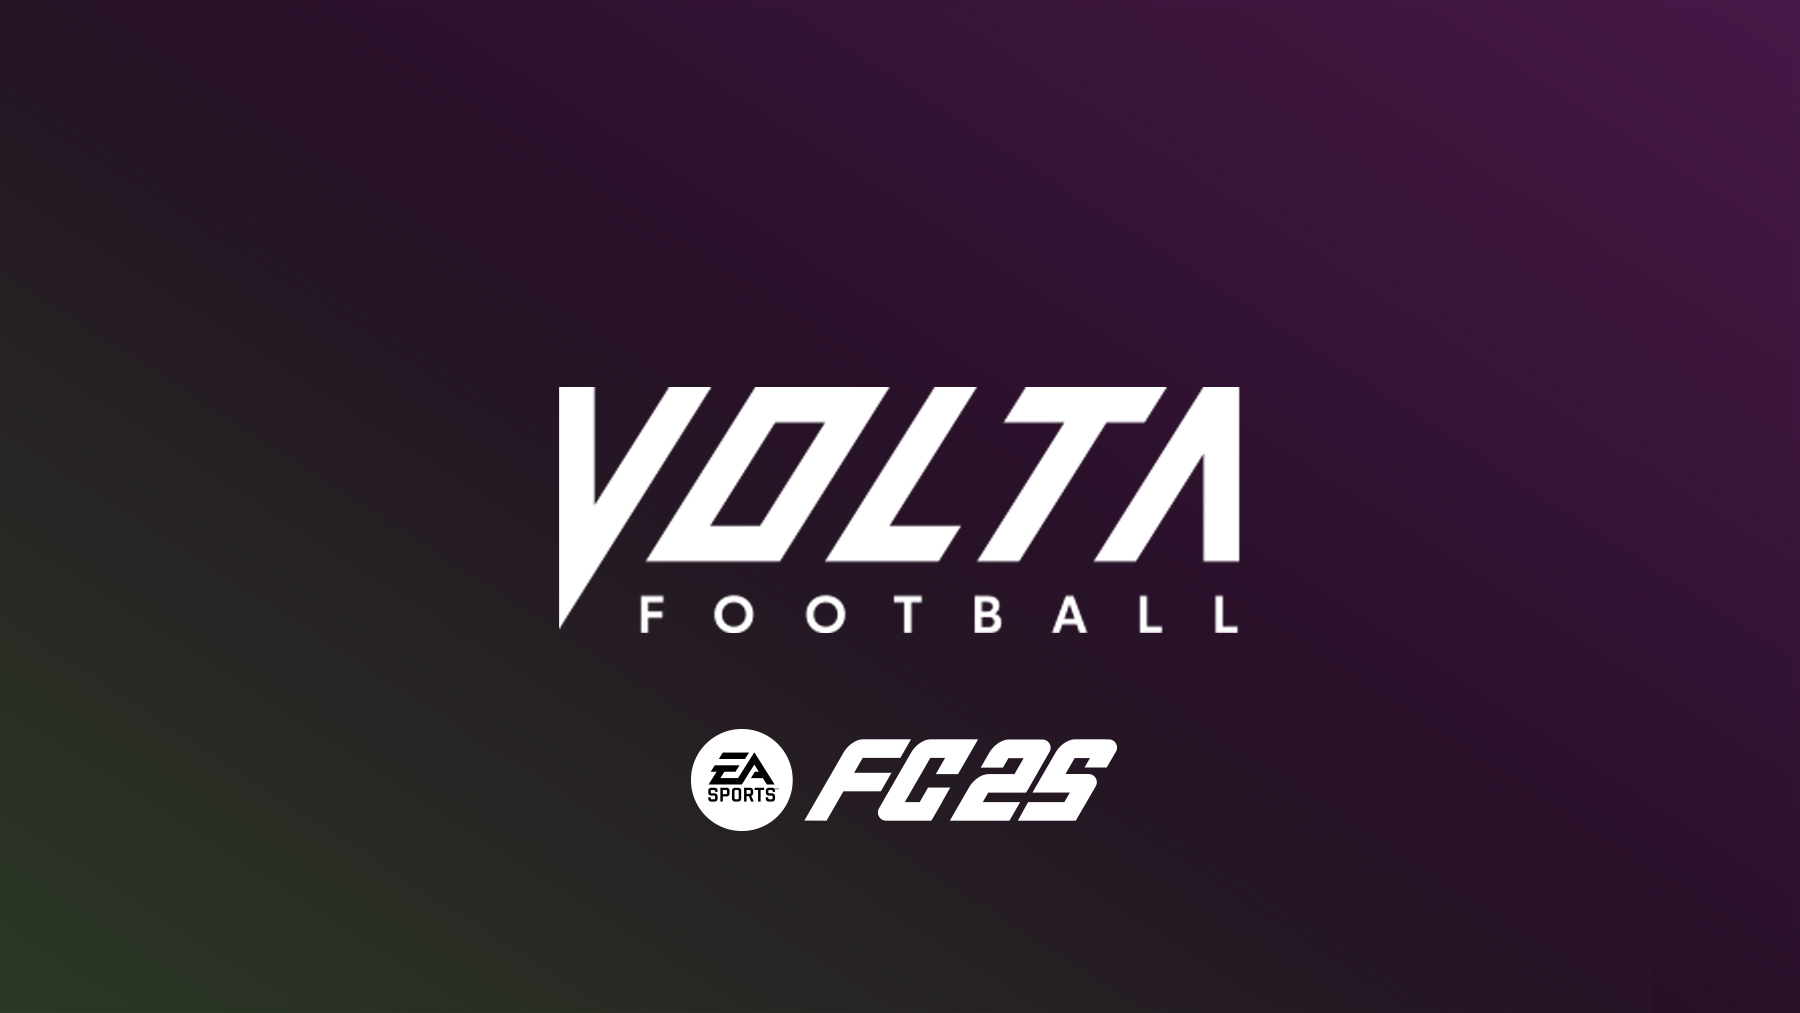 EA Sports FC 25 Volta Football - All the information, new features and the complete guide.